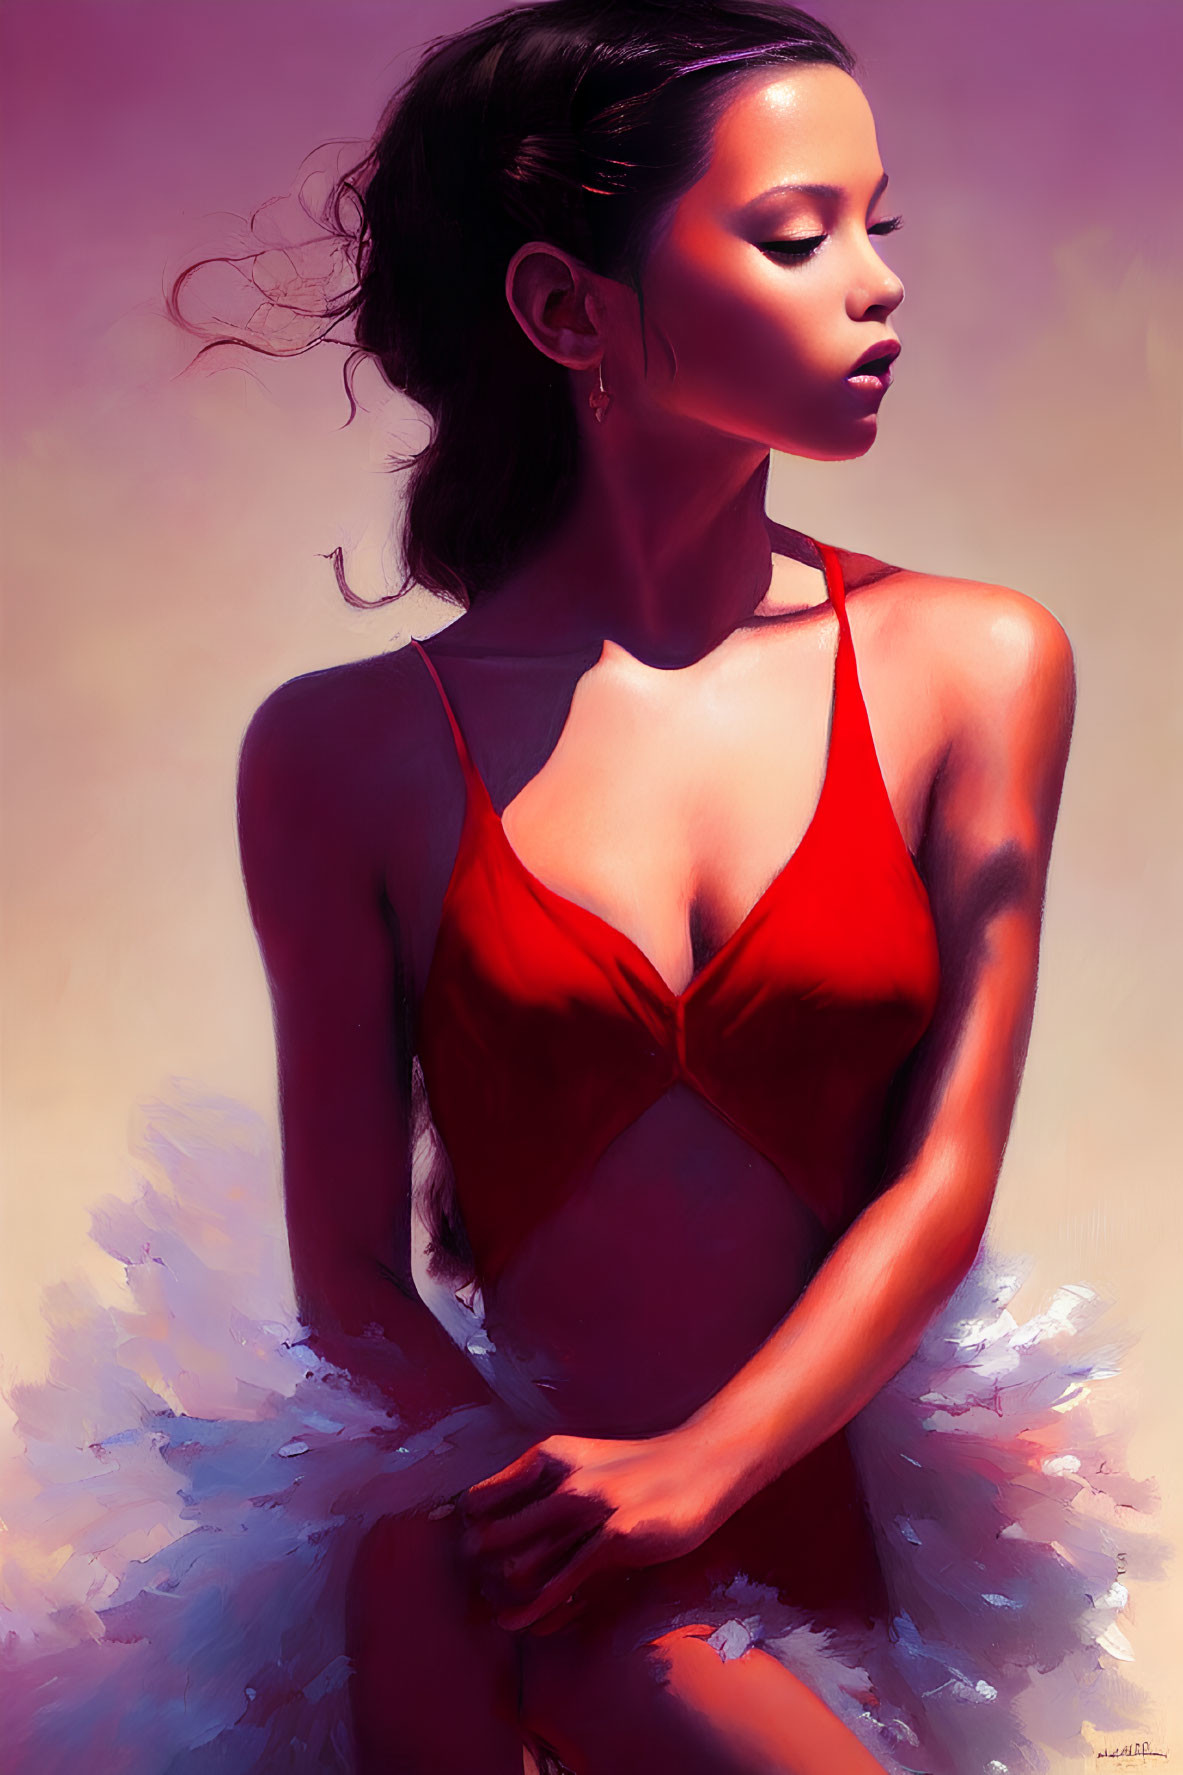 Woman in Red Swimsuit with Wistful Expression and Tousled Hair